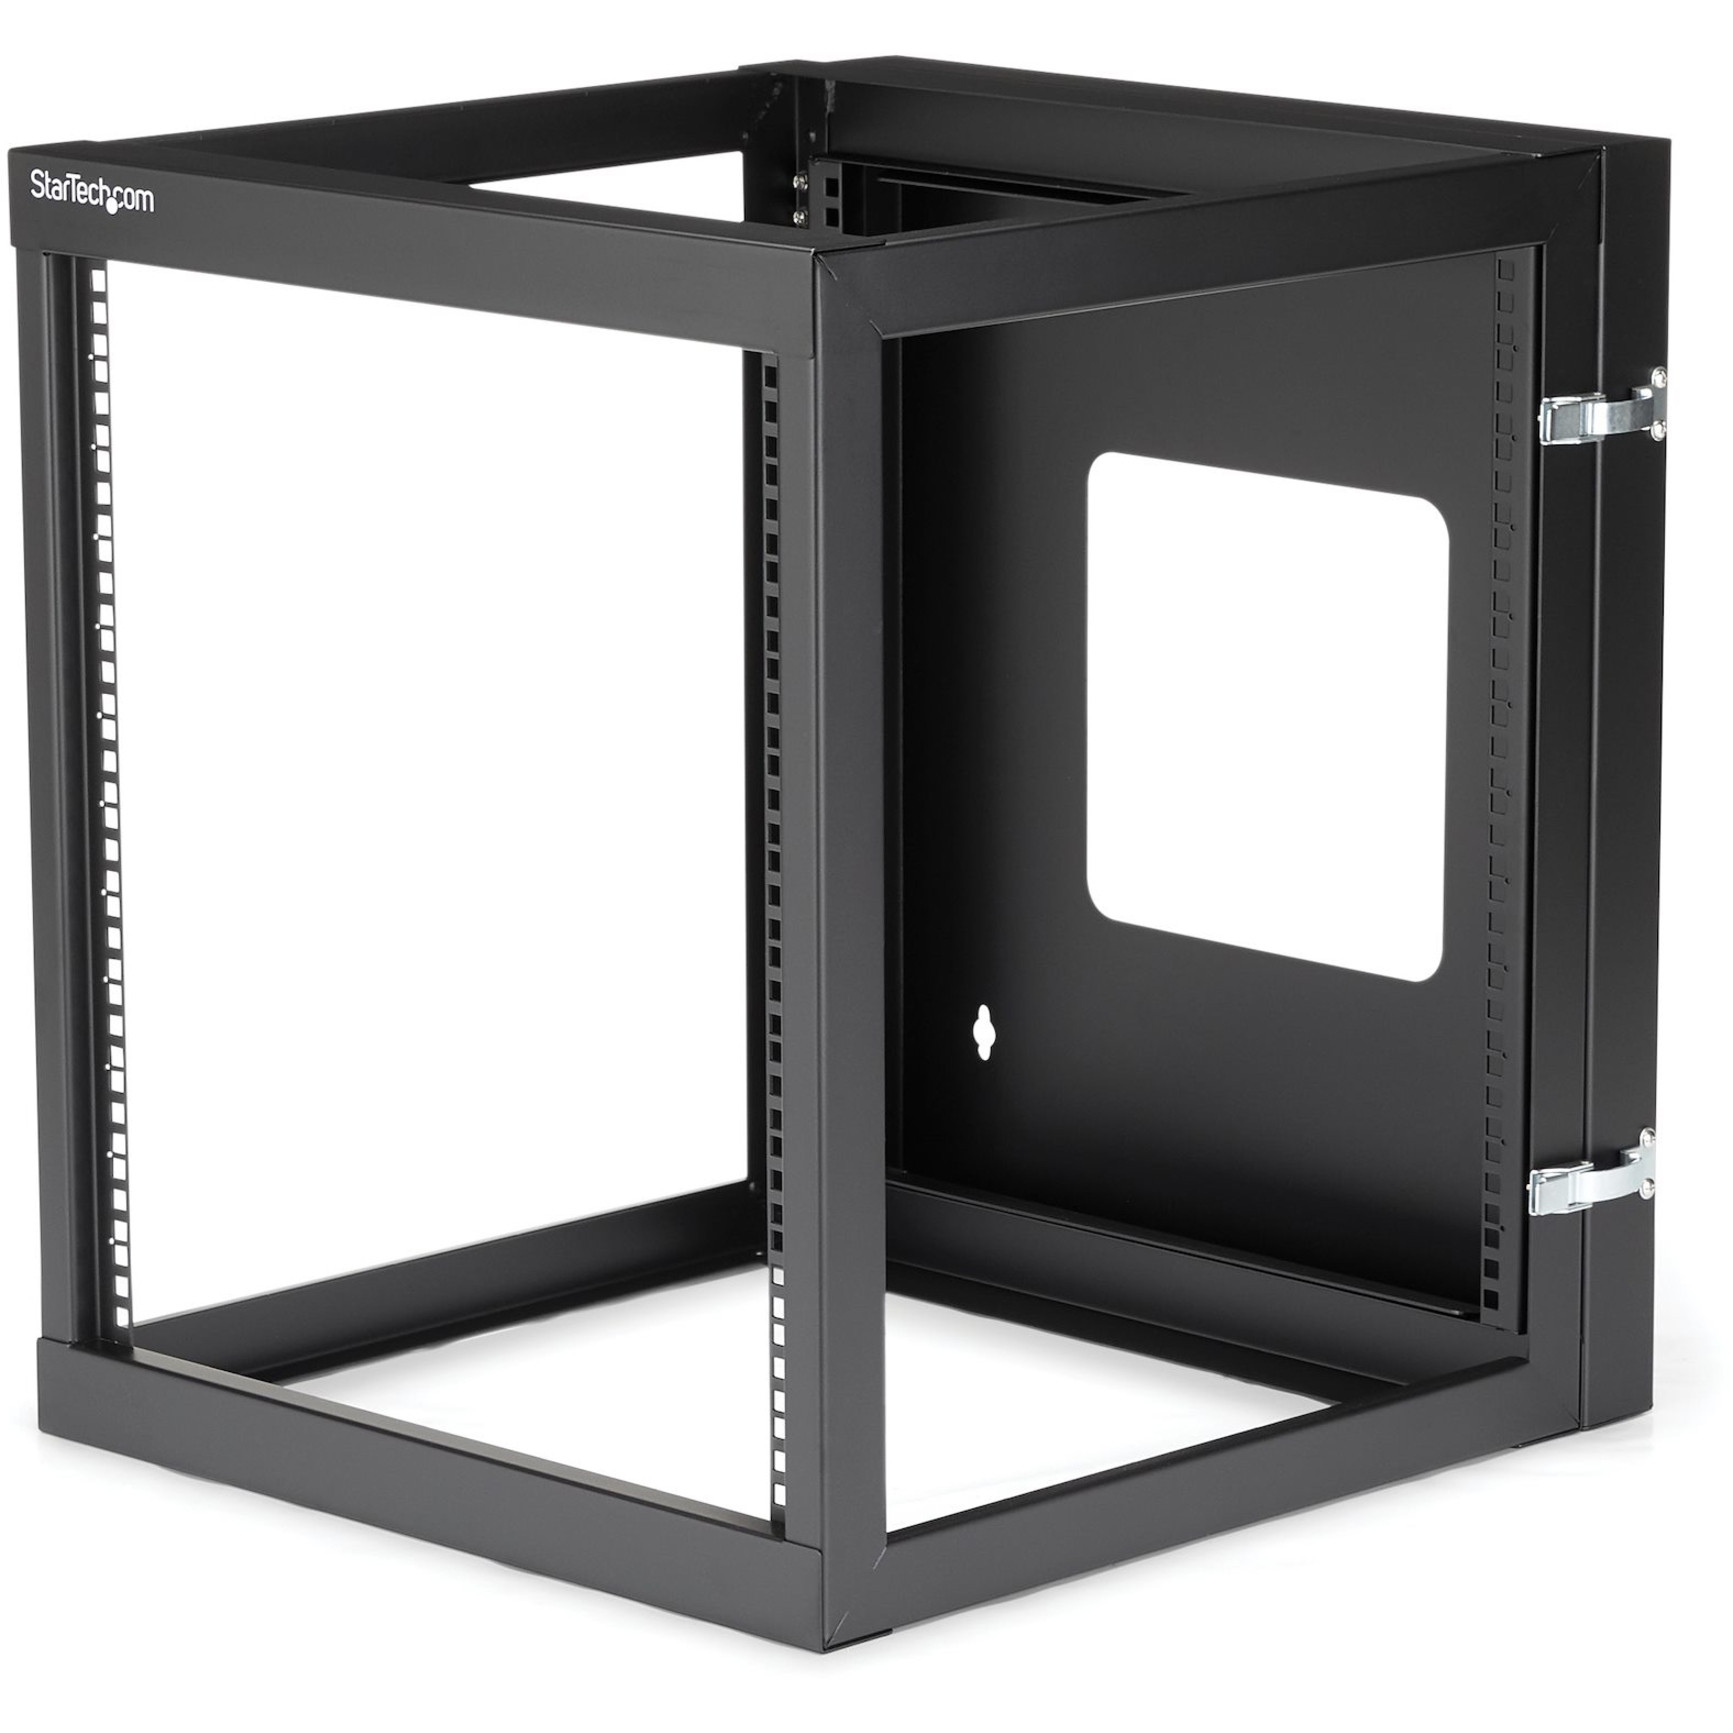 Startech .com 12U 22in Depth Hinged Open Frame Wallmount Server RackWall-mount your server or networking equipment with a hinged rack des… RK1219WALLOH